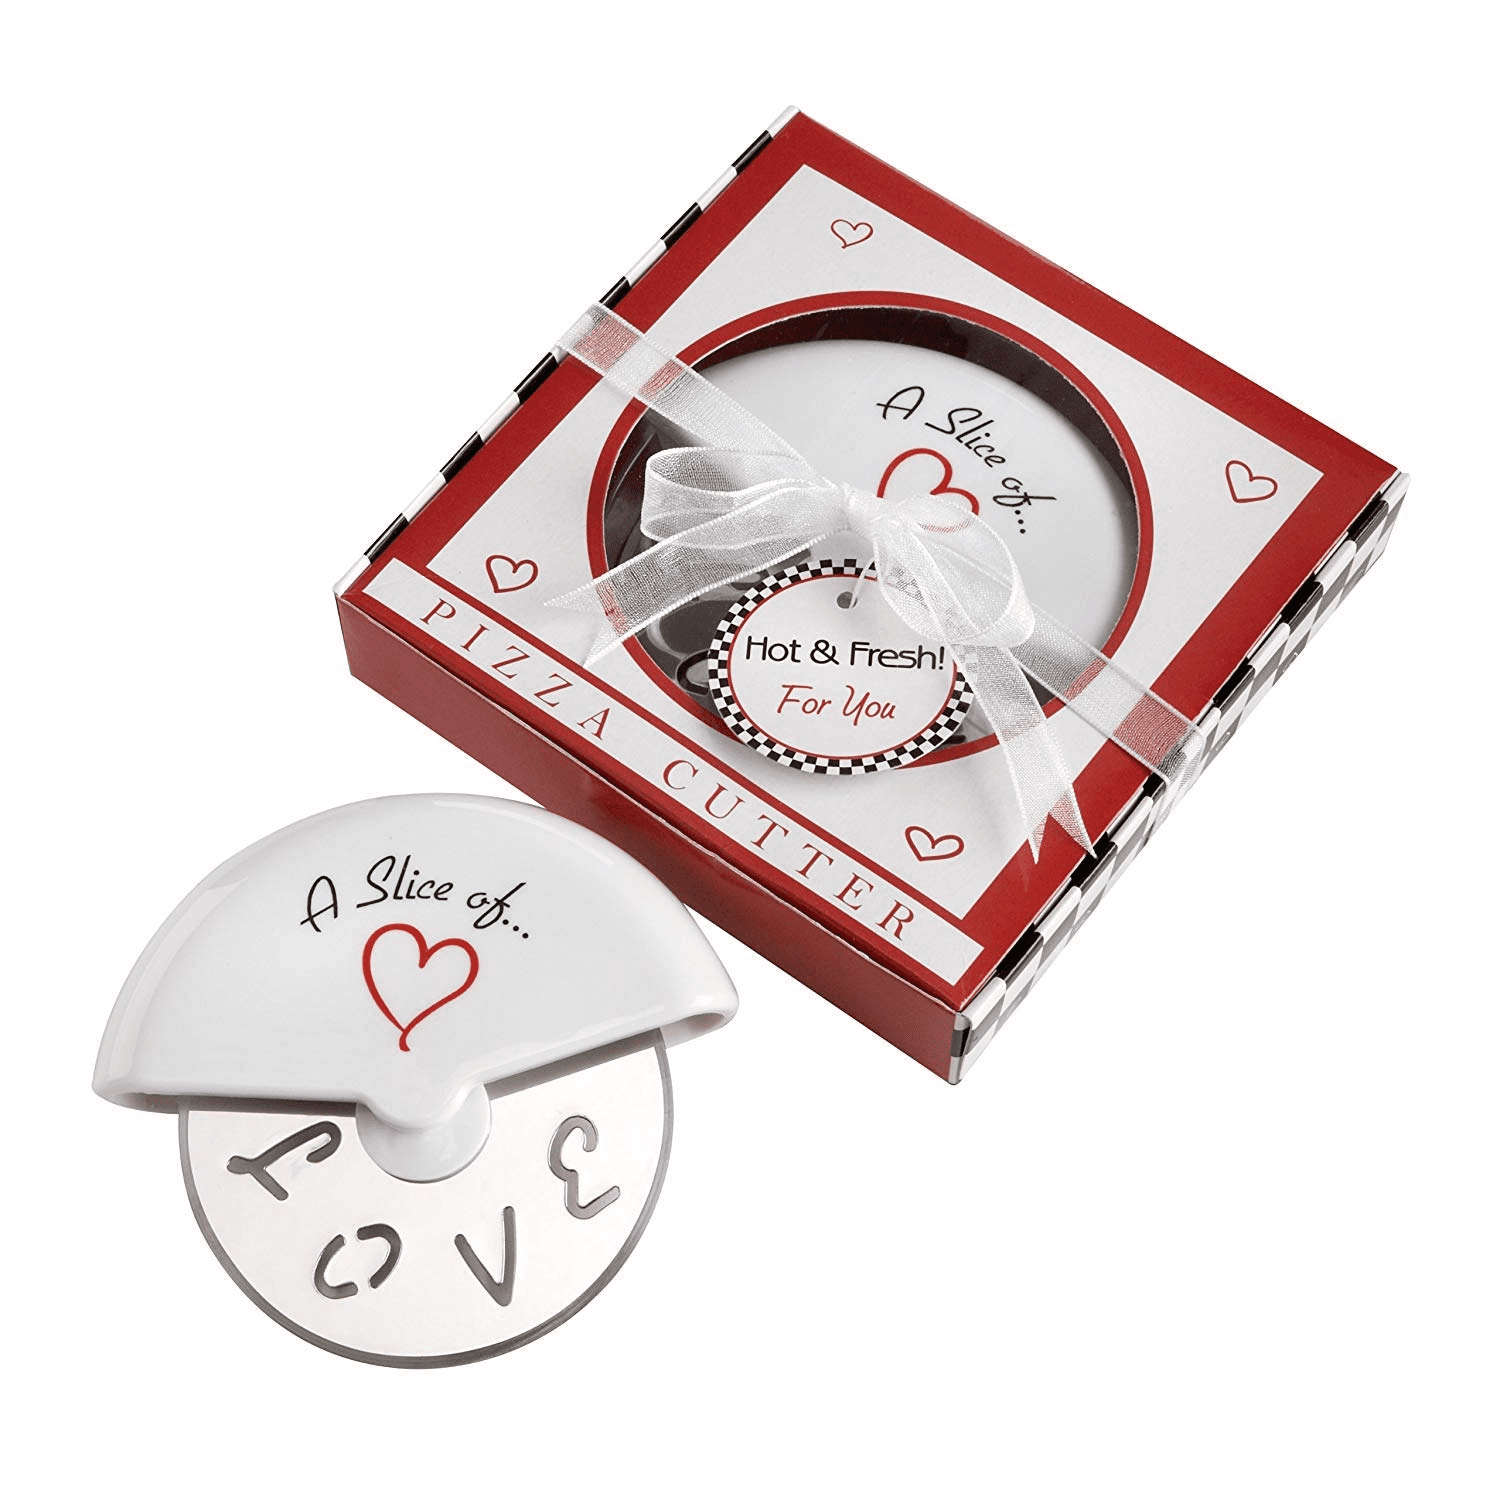 25 Slice Of Love Stainless Steel Pizza Cutter Wedding Bridal Shower Party Favors